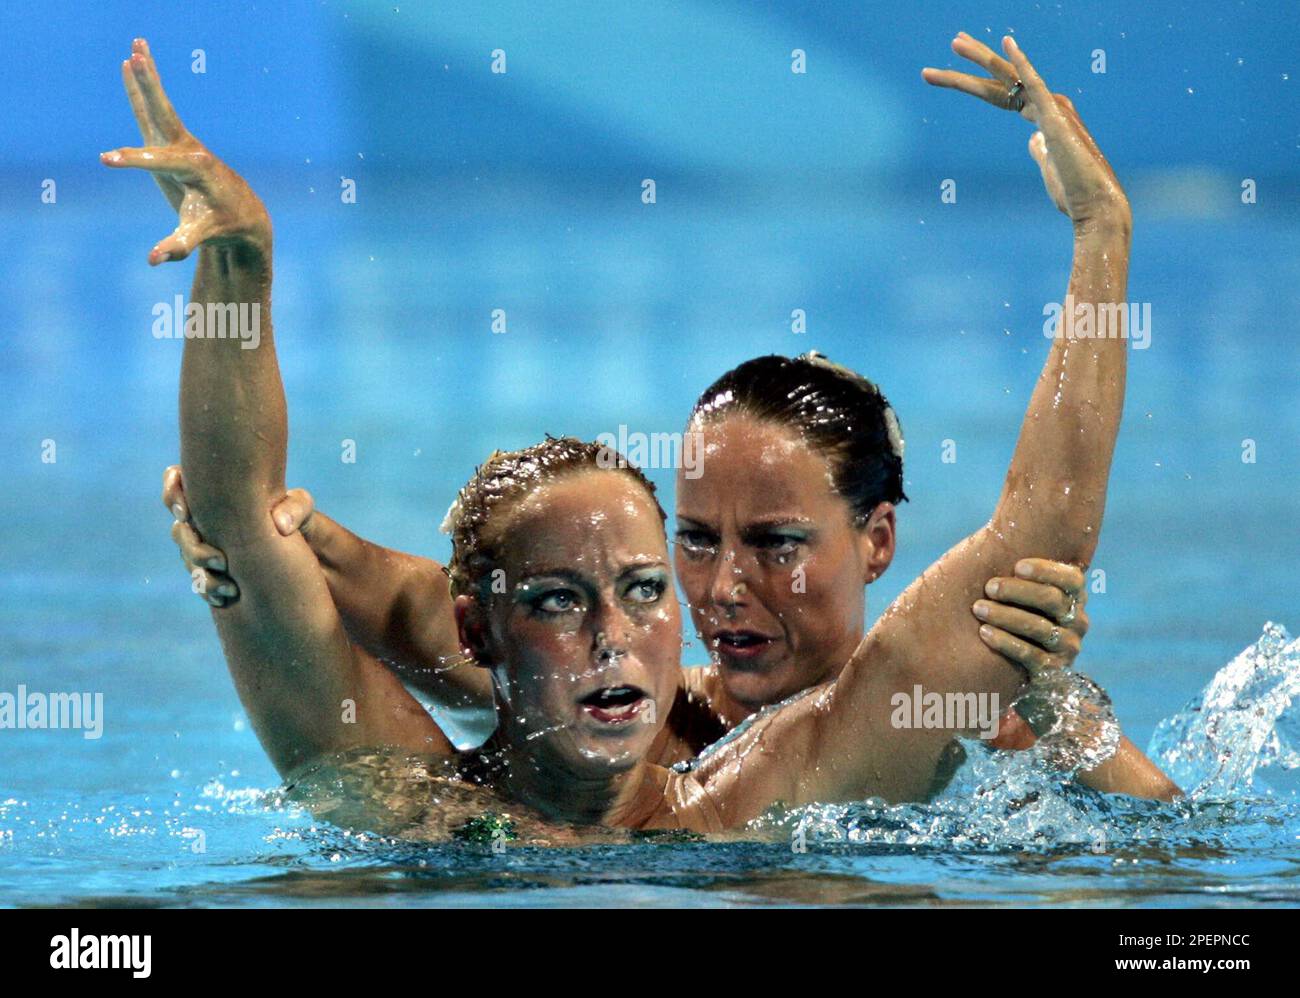 Twins Bianca and Sonja Van Der Velden of the Netherlands perform in the duet techical routine preliminary in synchronized swimming, in the Olympic Aquatic Center at the 2004 Olympic Games in Athens,